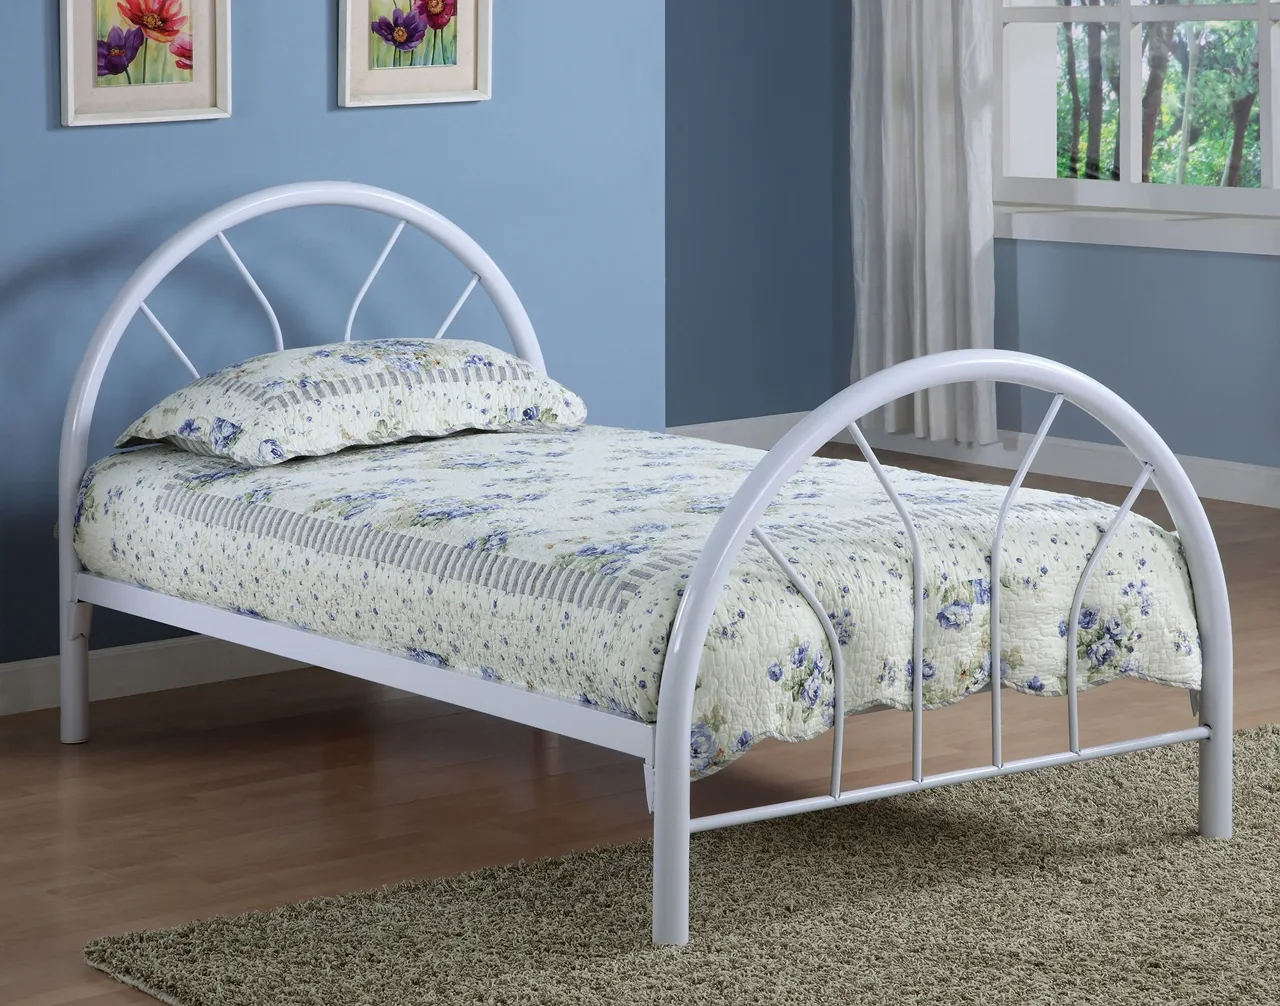 MARJORIE TWIN METAL BED WHITE MARJORIE YOUTH BED